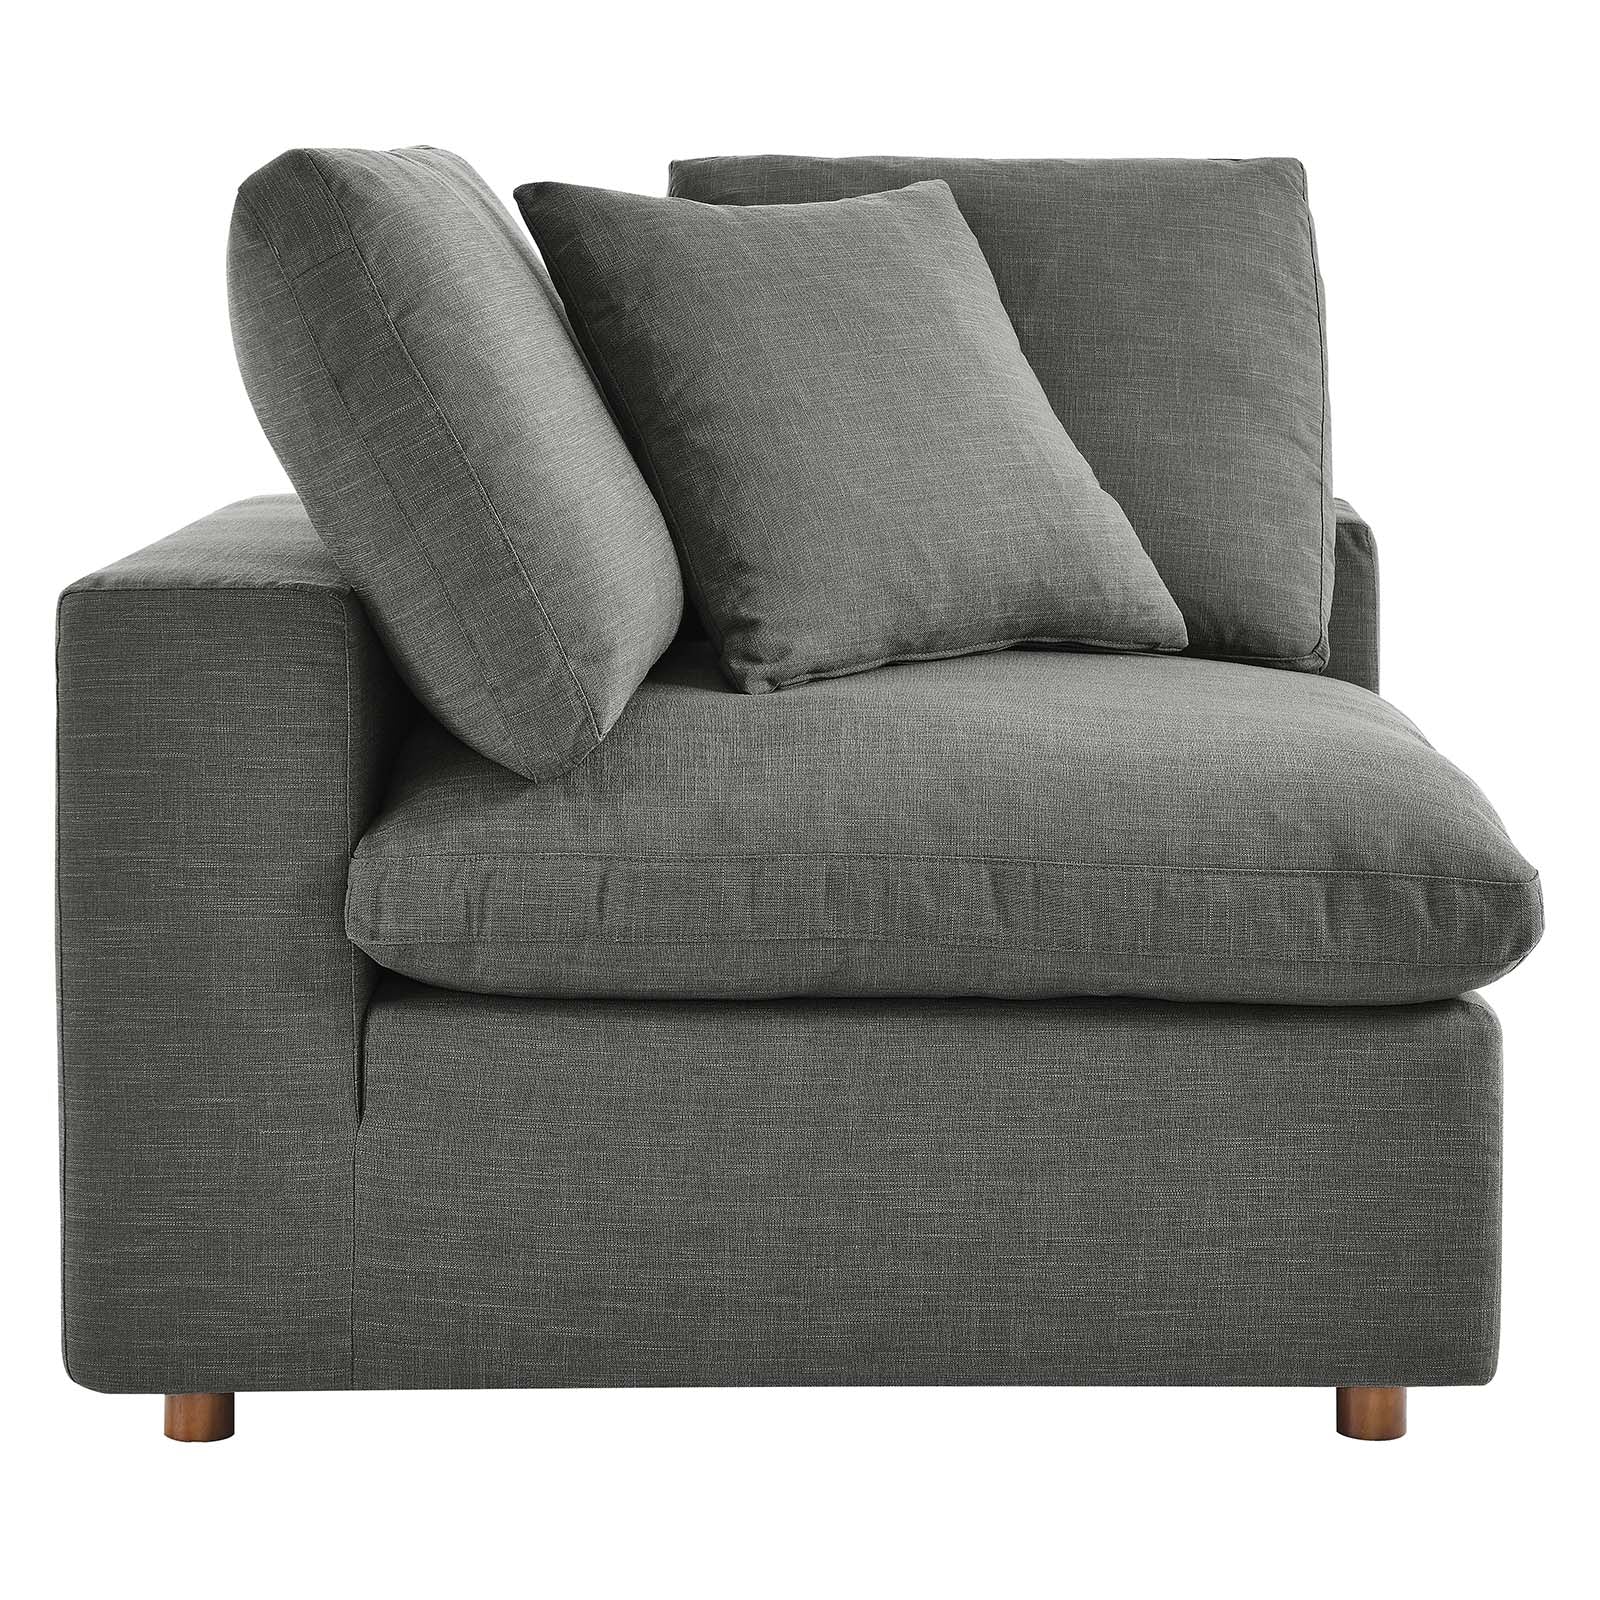 Modway Living Room Sets - Commix Down Filled Overstuffed 4 Piece Sectional Sofa Set Gray